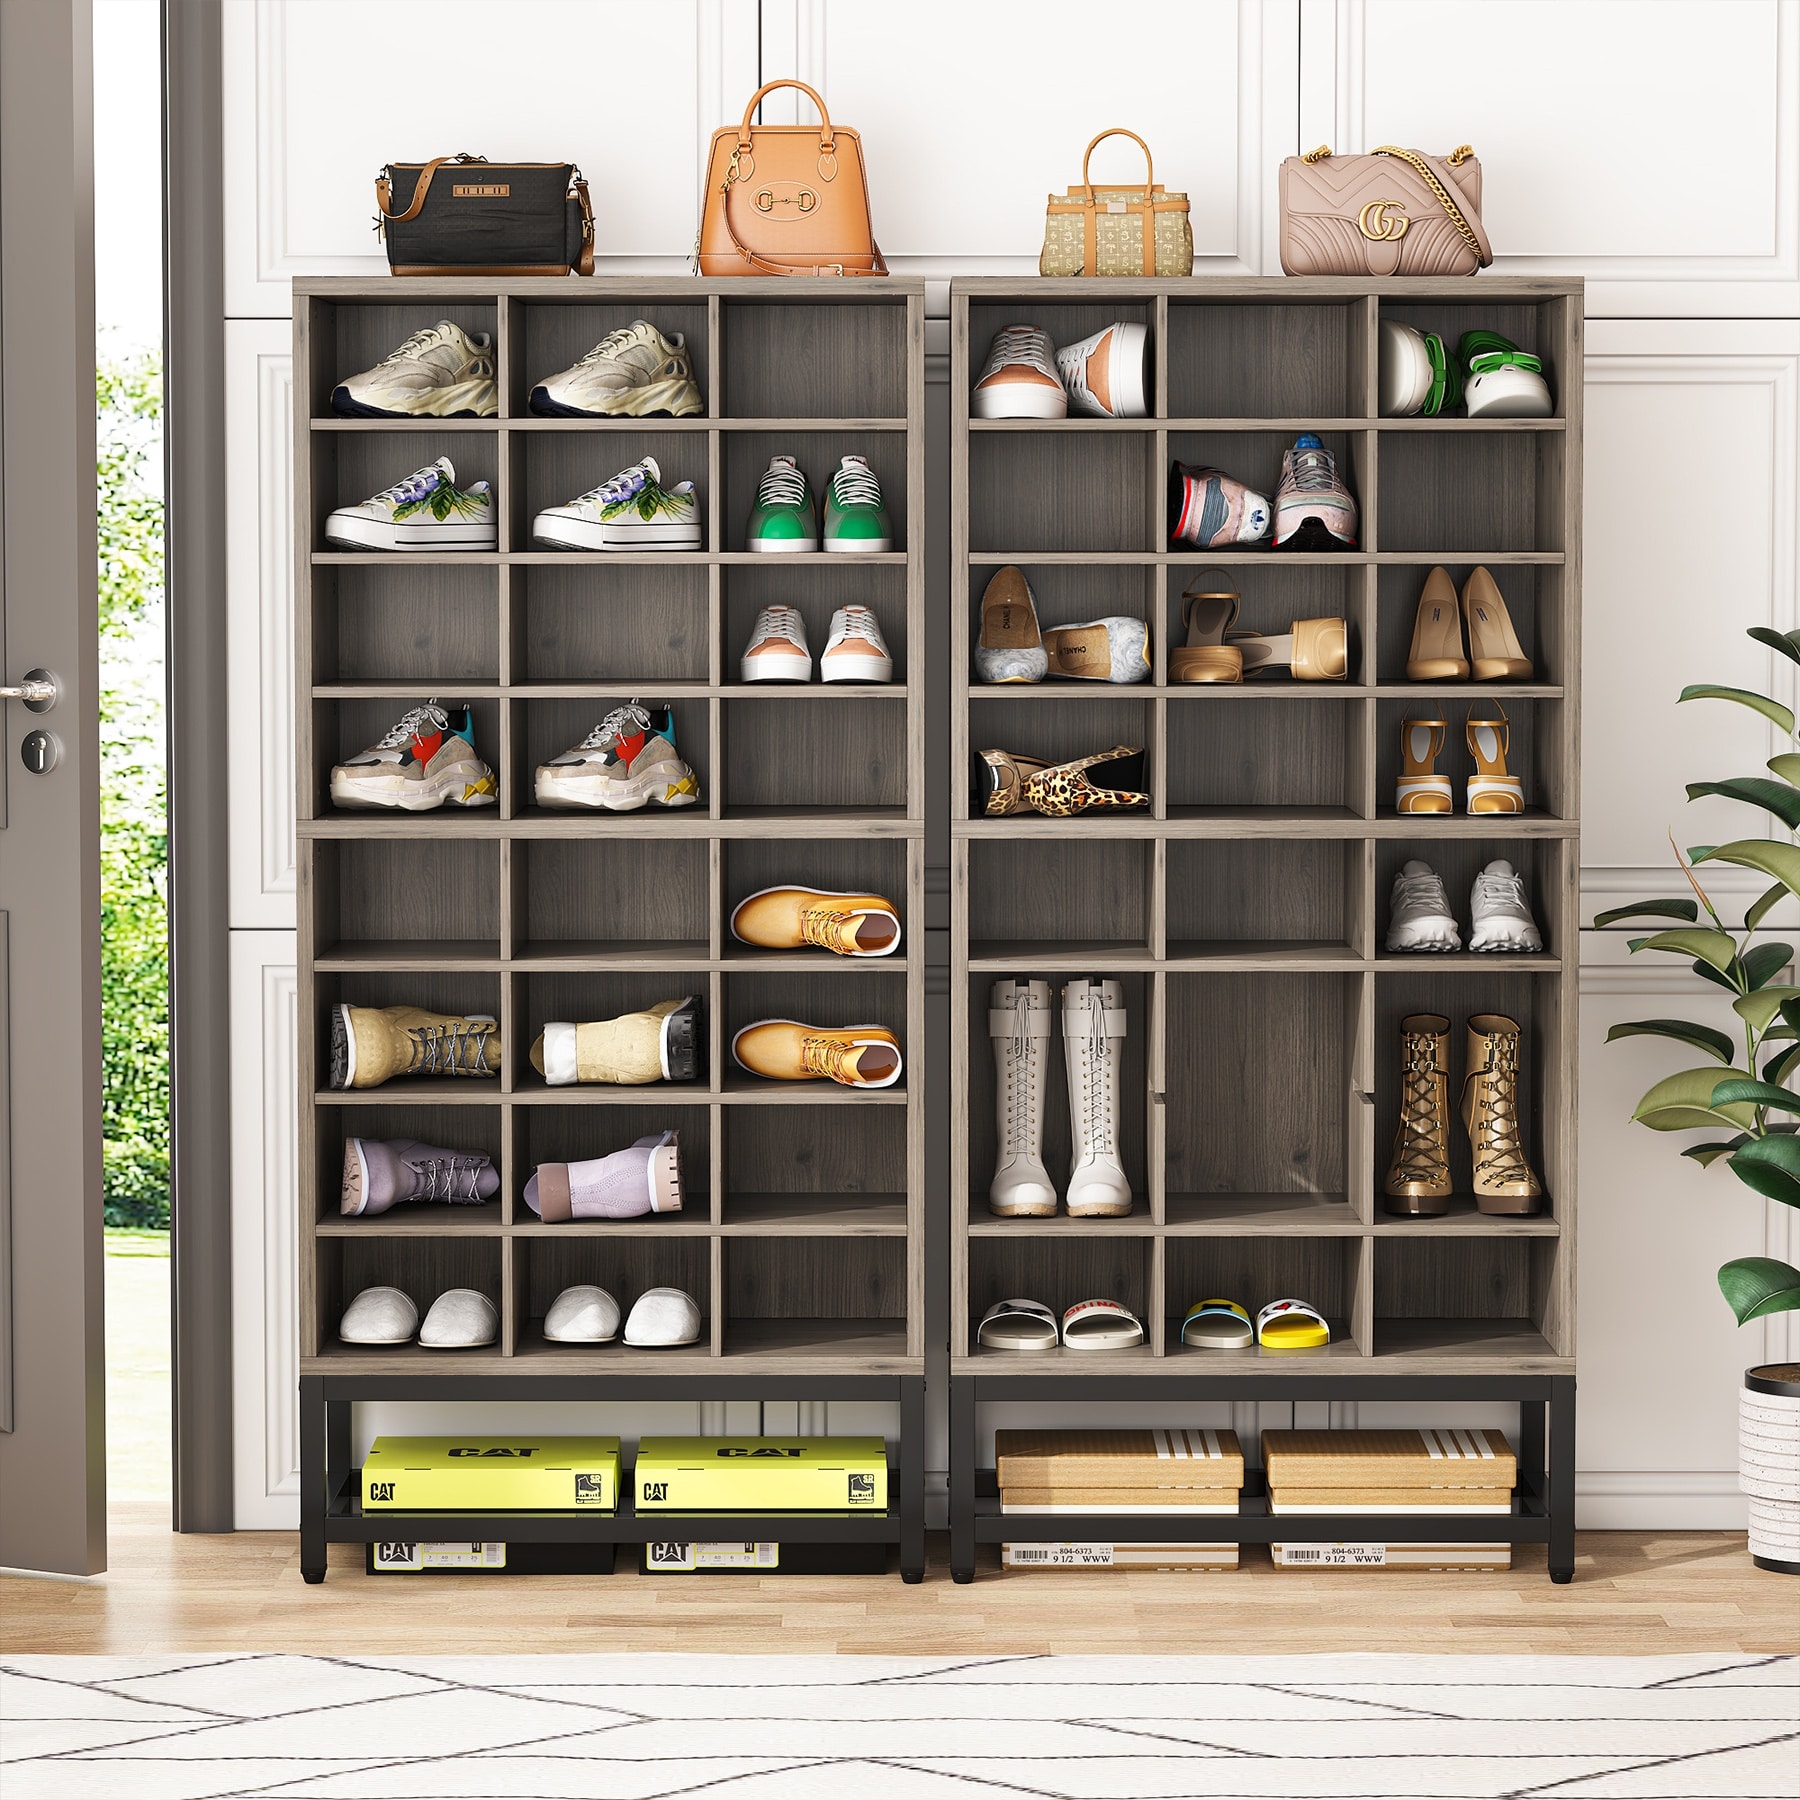 https://ak1.ostkcdn.com/images/products/is/images/direct/d14e95403b8ff64c71791ba5730807c06eb306b4/Shoe-Storage-Rack%2C-24-Pair-Shoe-Storage-Cabinet-for-Entryway.jpg